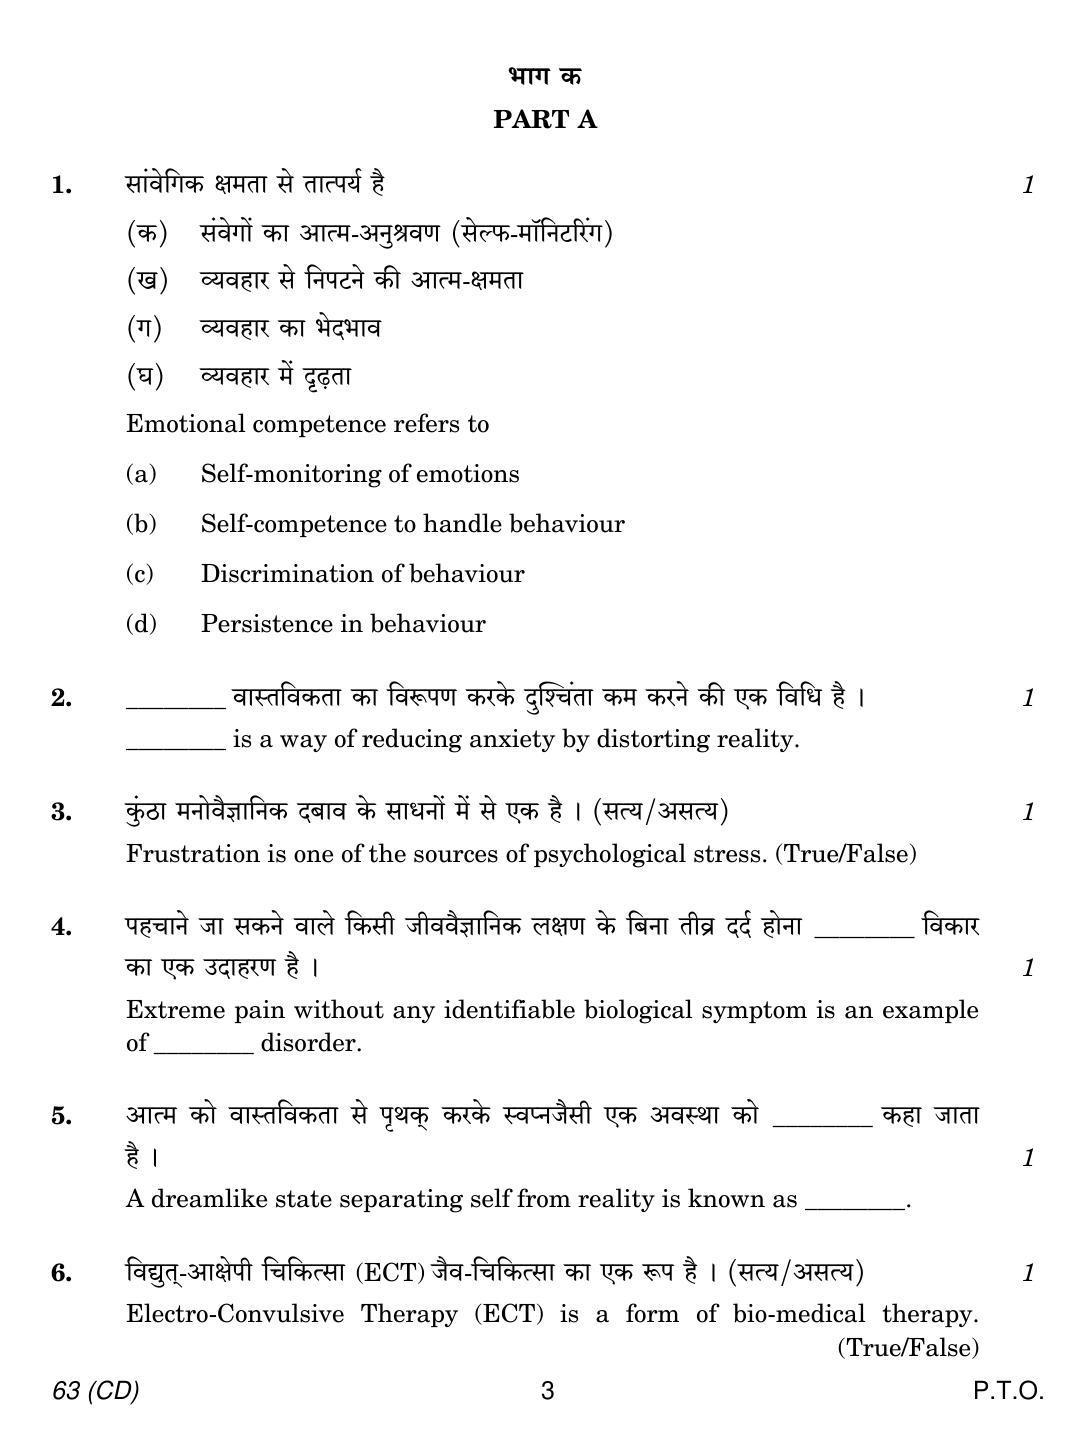 CBSE Class 12 63 PSYCHOLOGY CD 2018 Question Paper - Page 3